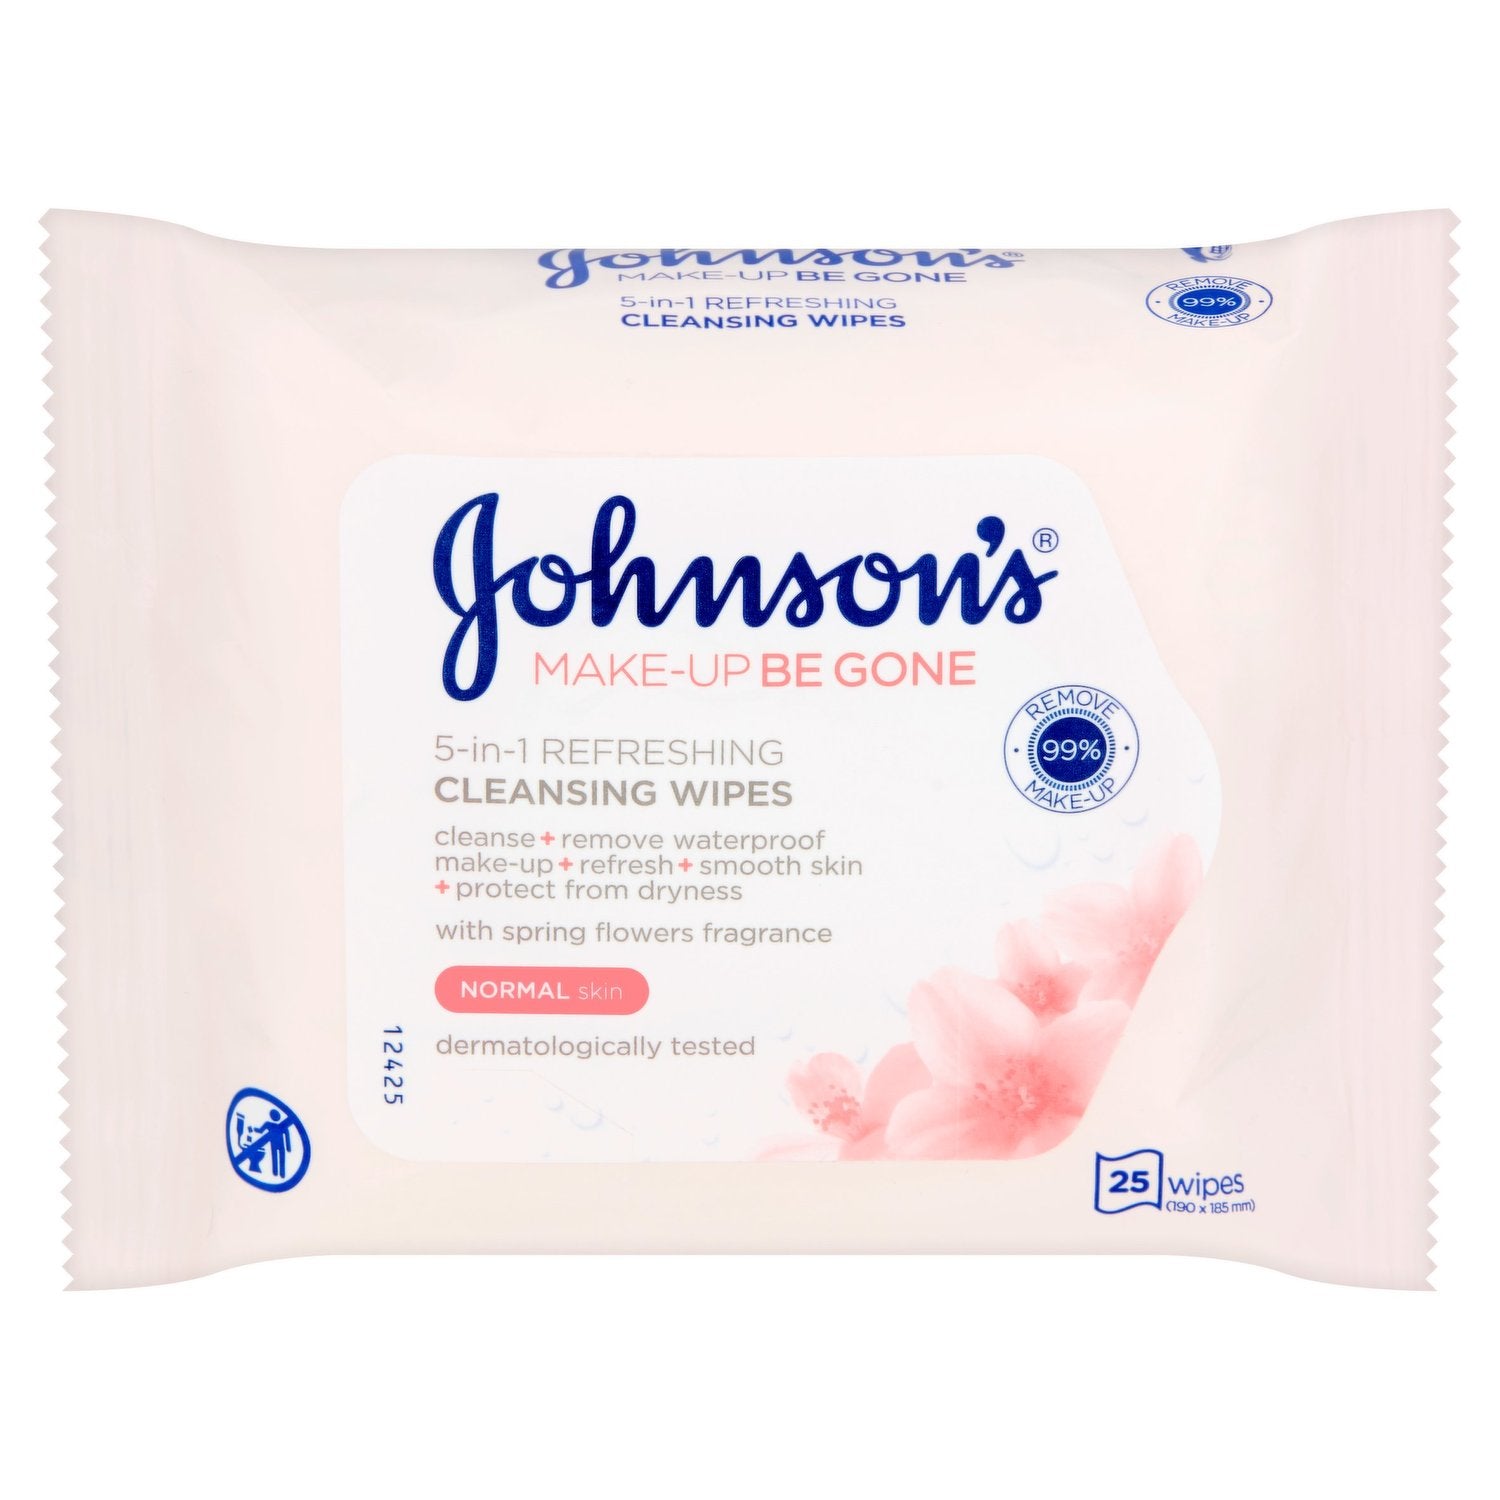 5 in 1 Refreshing Cleansing Wipes